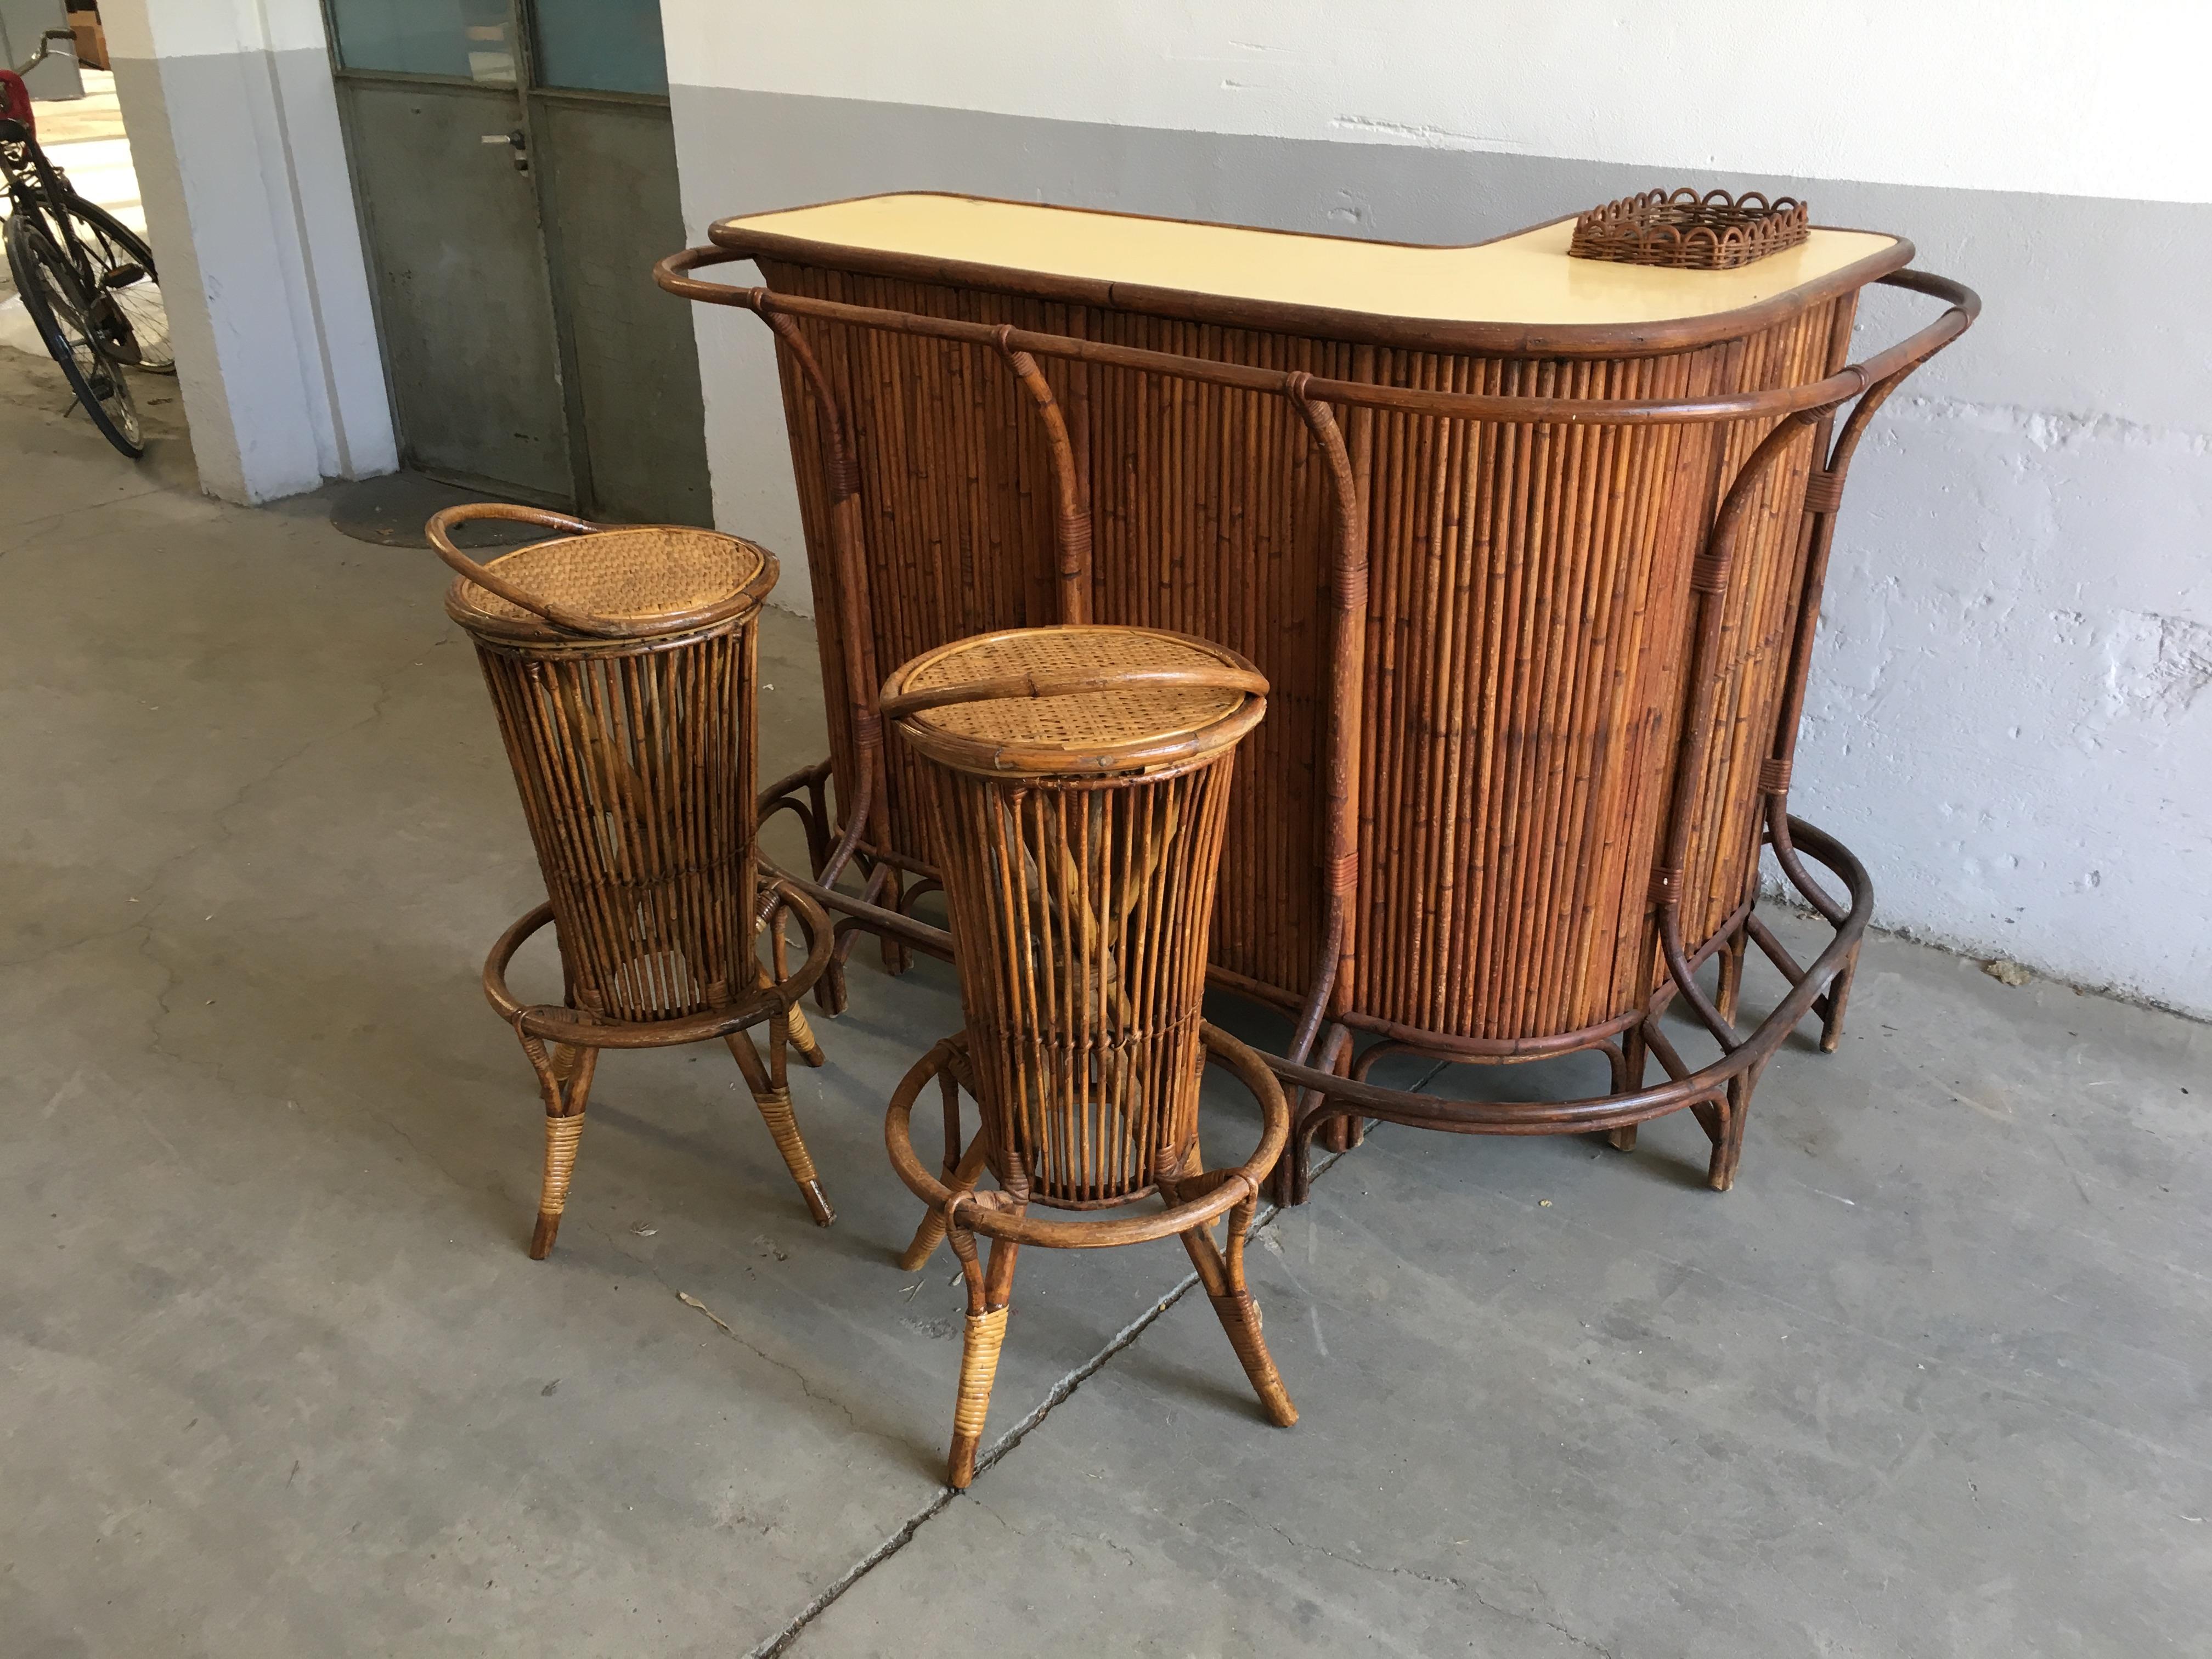 Mid-Century Modern French Riviera bamboo bar with Formica top equipped with two bamboo and rattan pair of stools.
Measures:
Counter cm.145 x 100 x height 106
Stools diameter cm.36 x height 78 each
This set presents some signs due to age and use